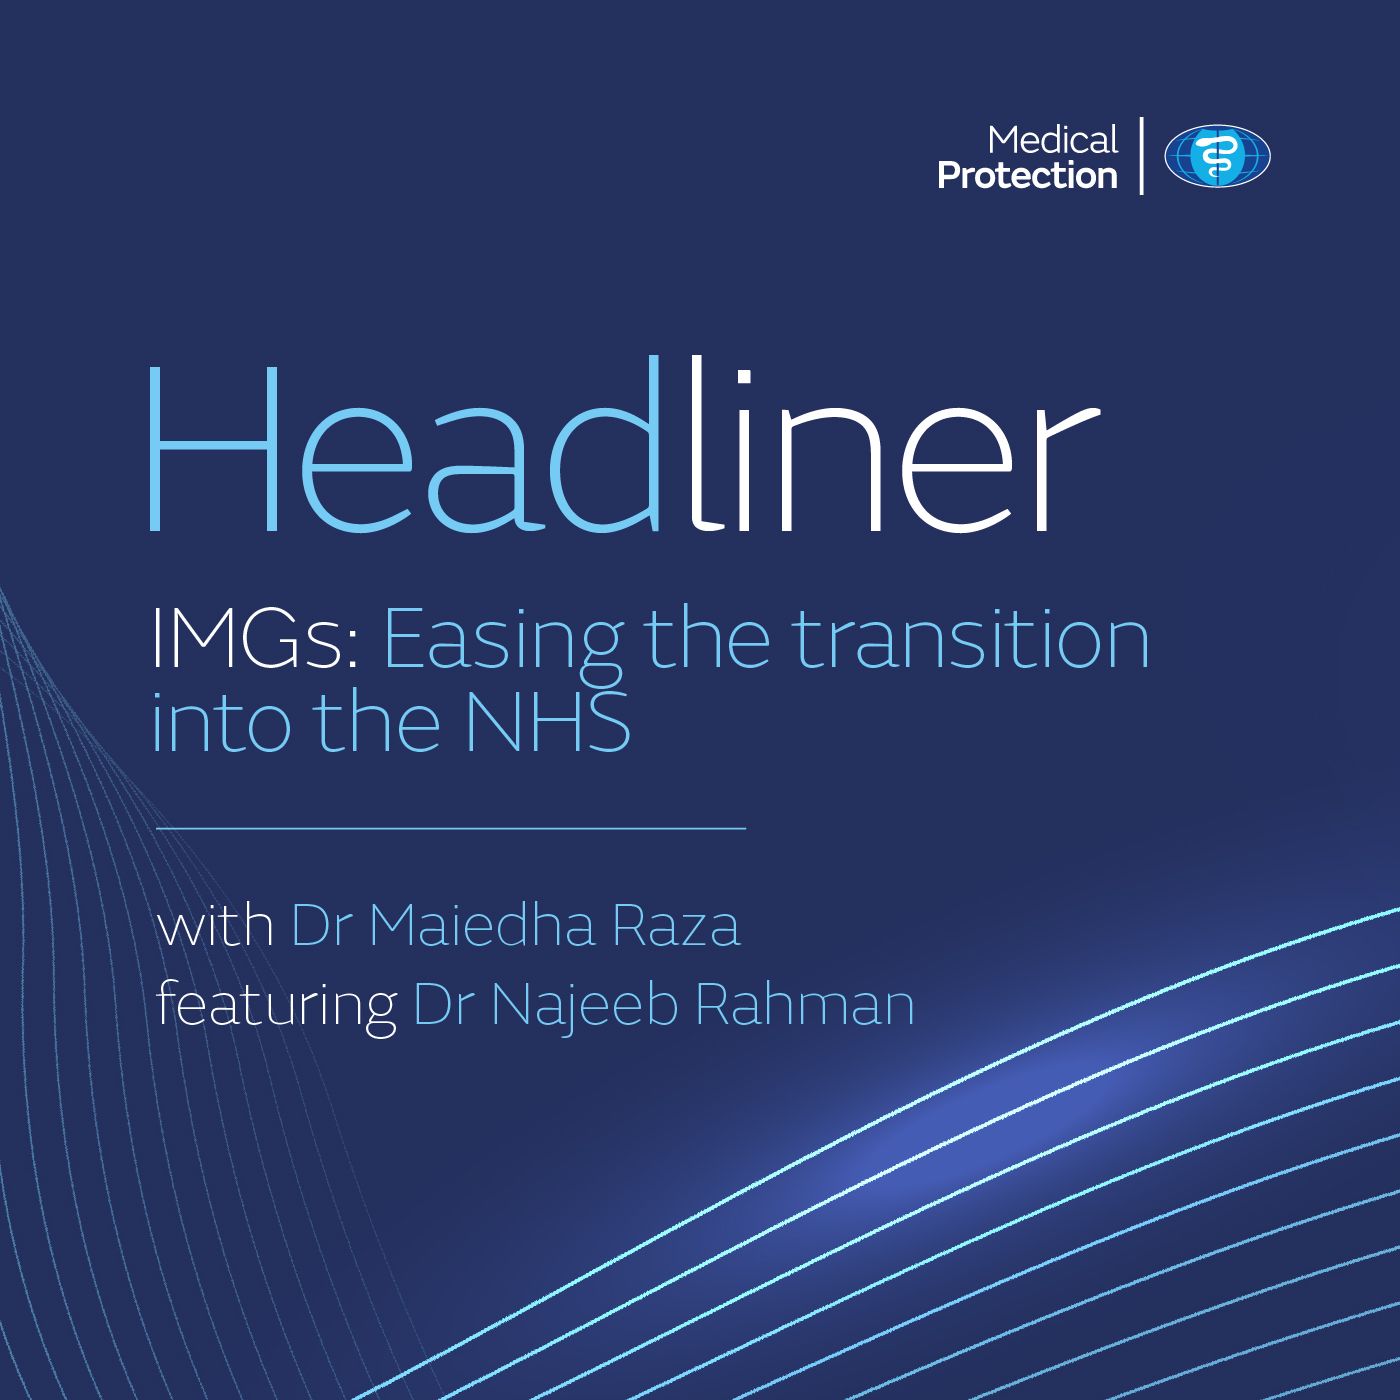 IMGs: Easing the transition into the NHS